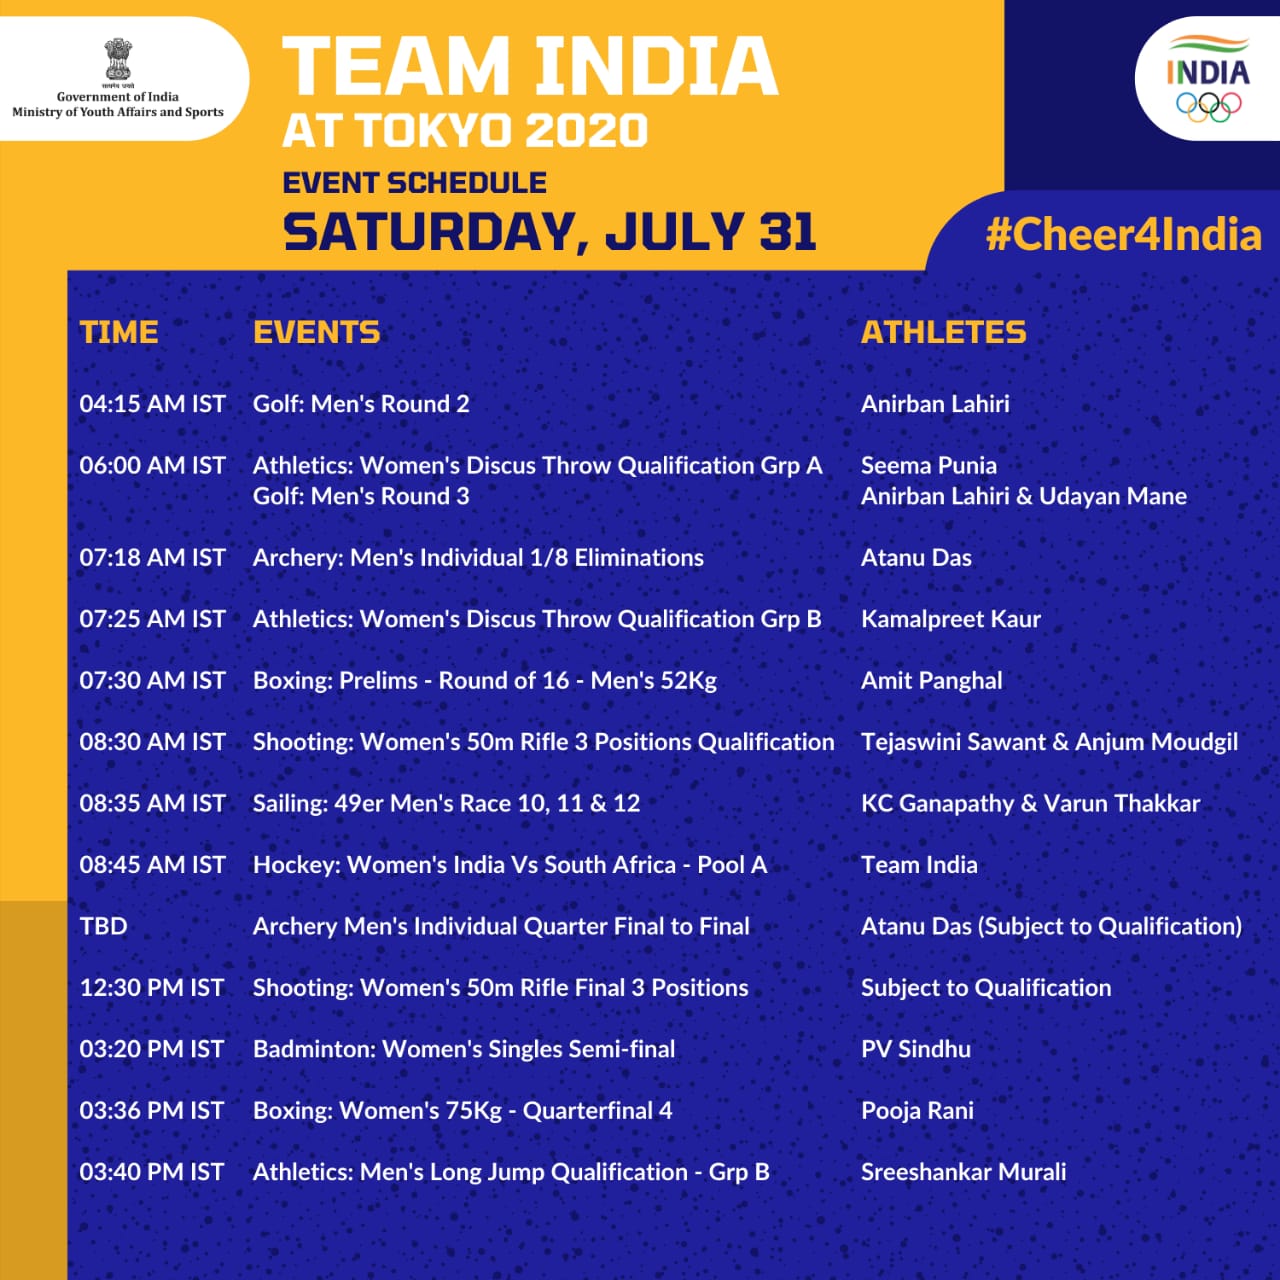 Complete schedule of Indian action on Saturday.